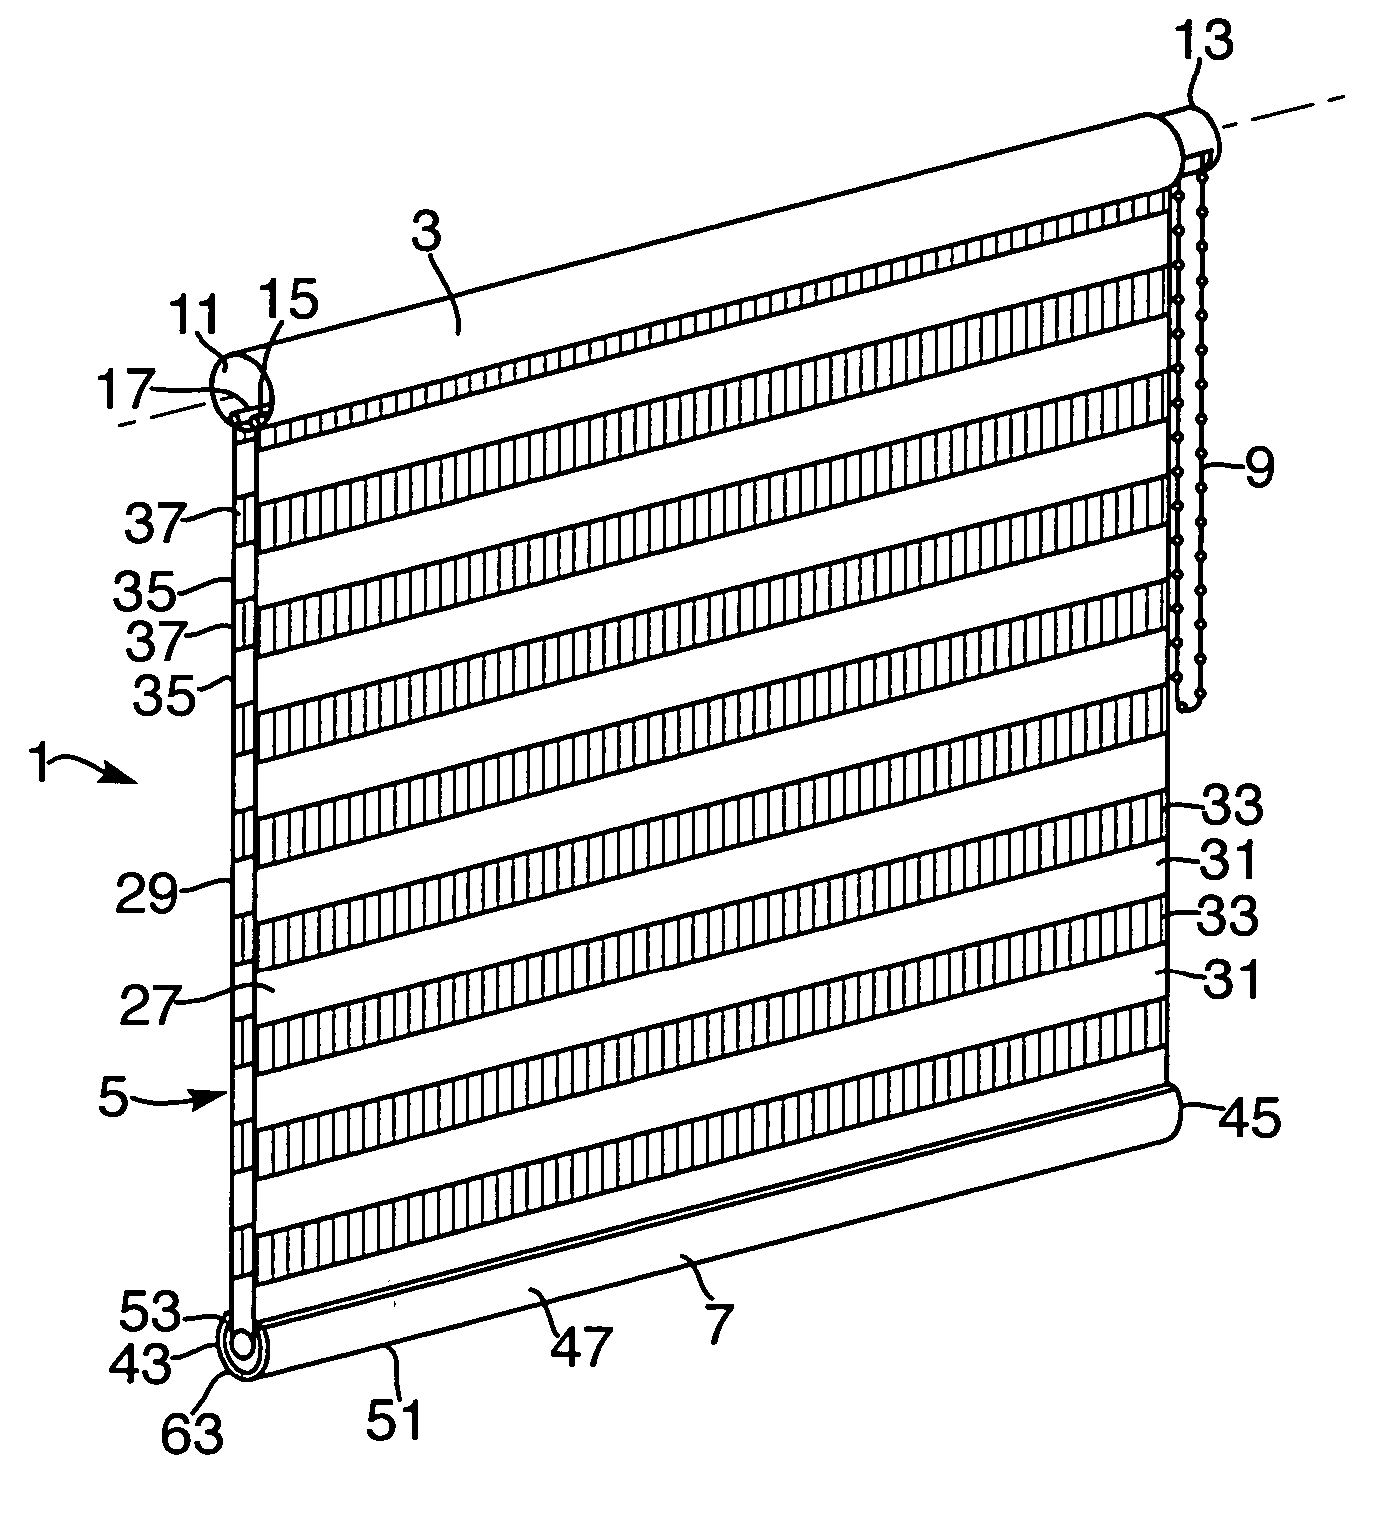 Attachment of an architectural covering